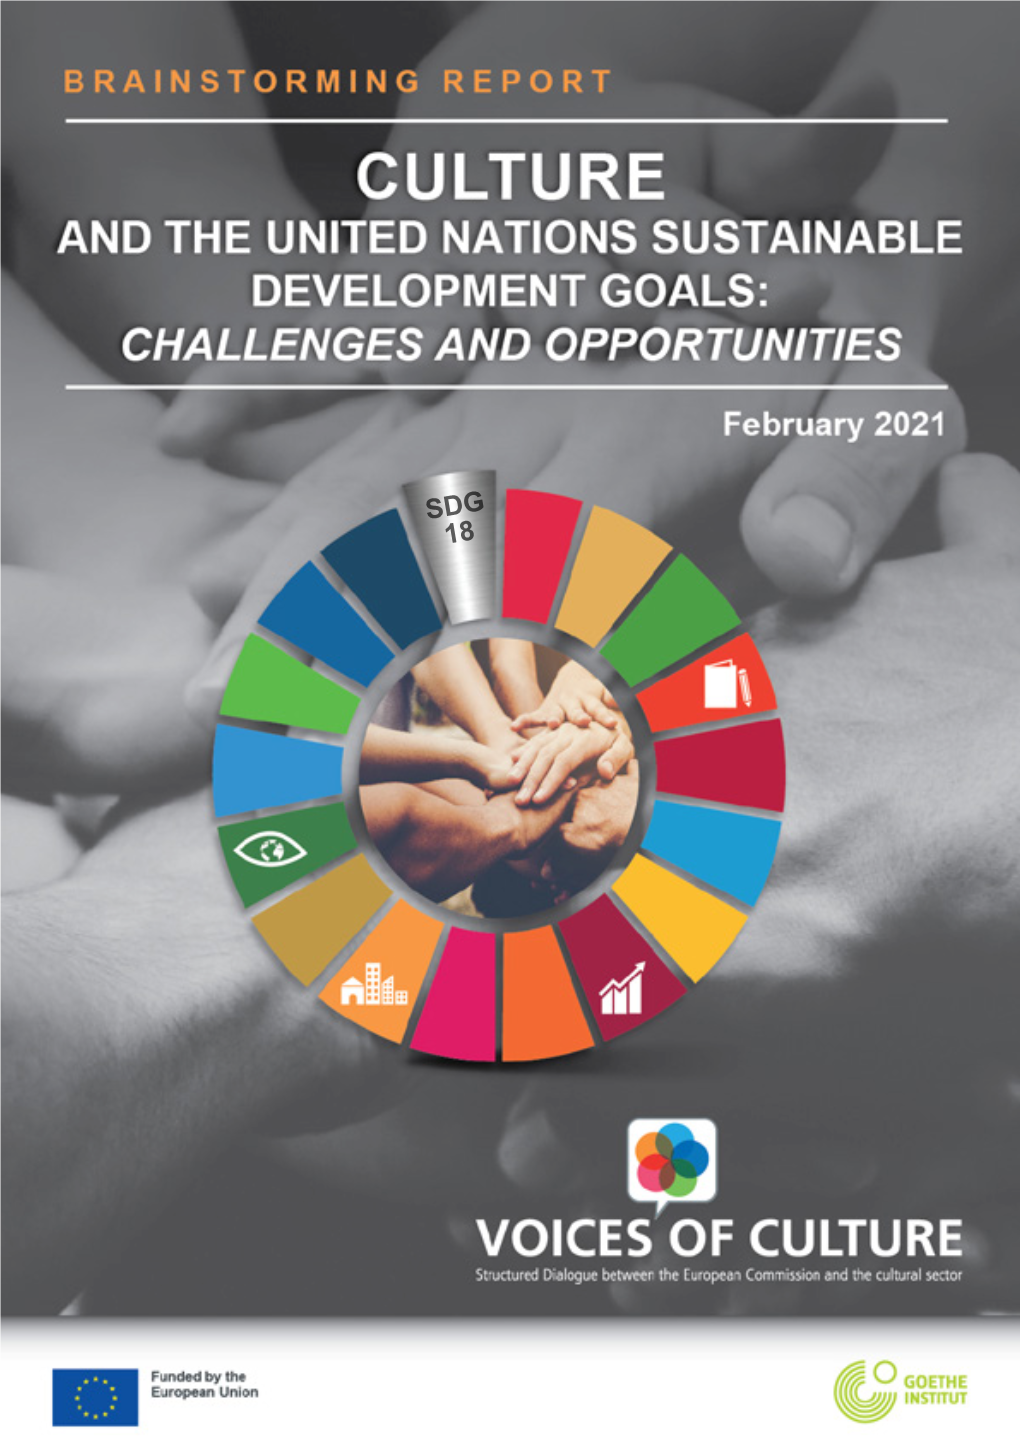 Culture and the UN's Sustainable Development Goals